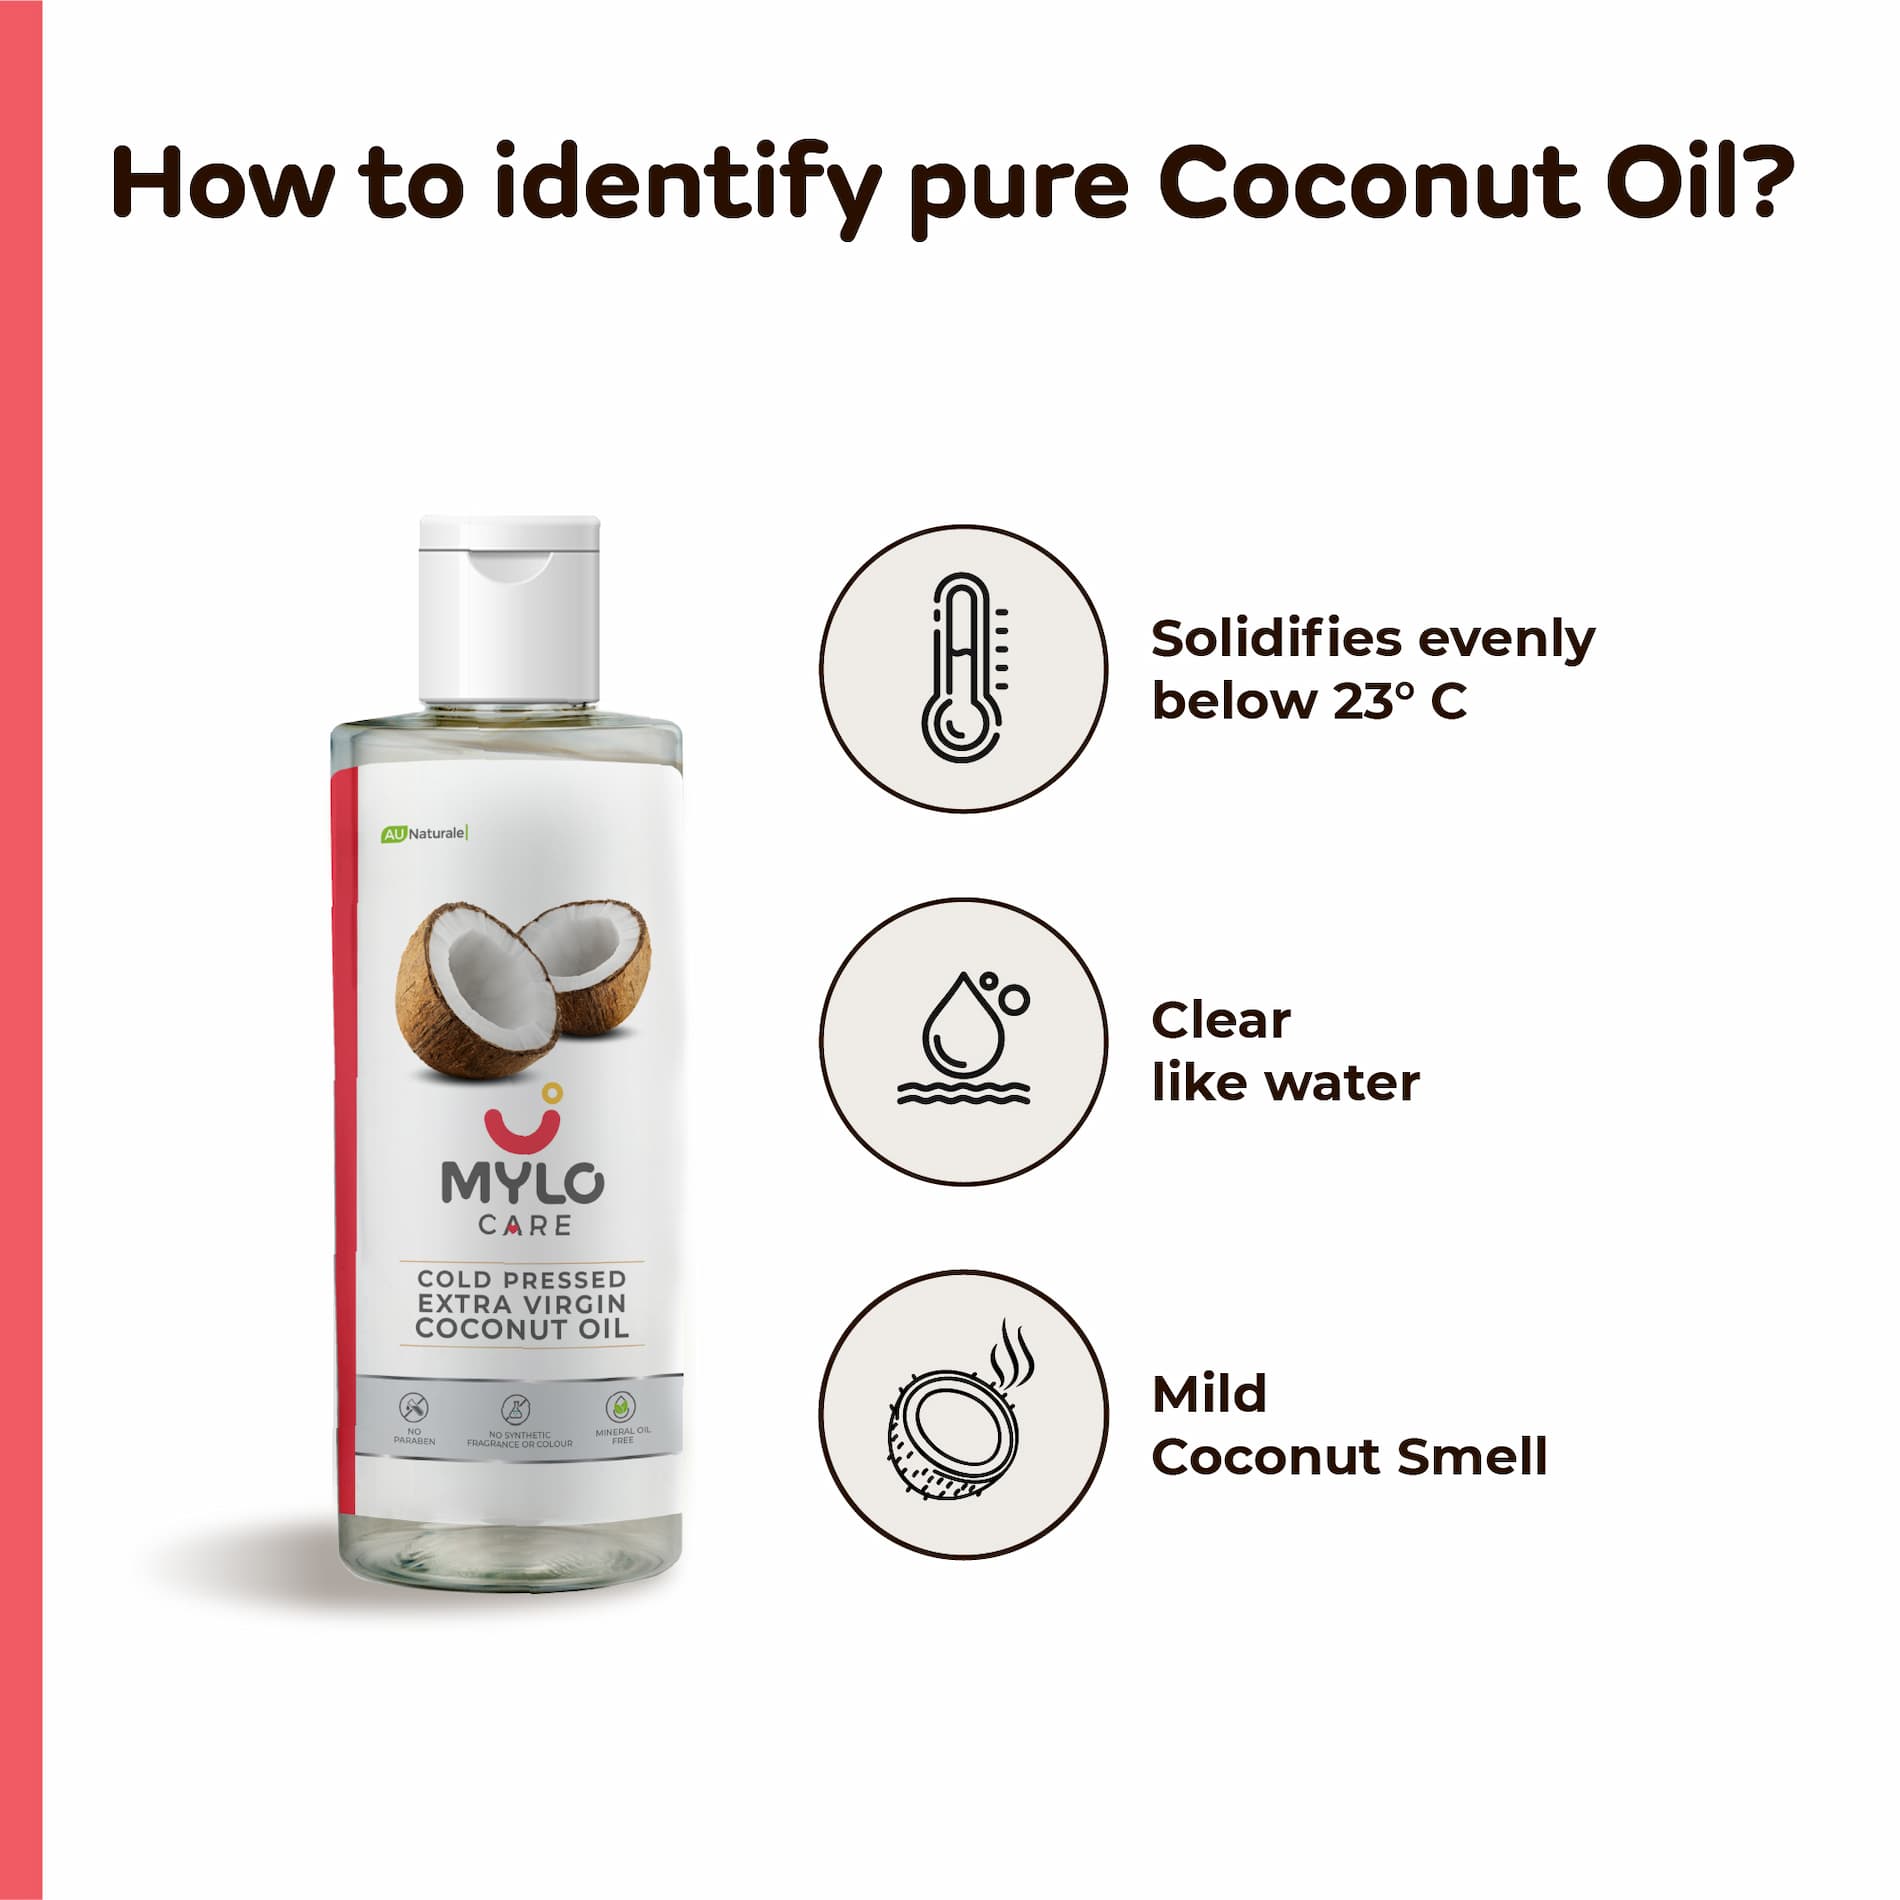 Mylo Cold Pressed Extra Virgin Coconut Oil for Skin & Hair (200 ml)